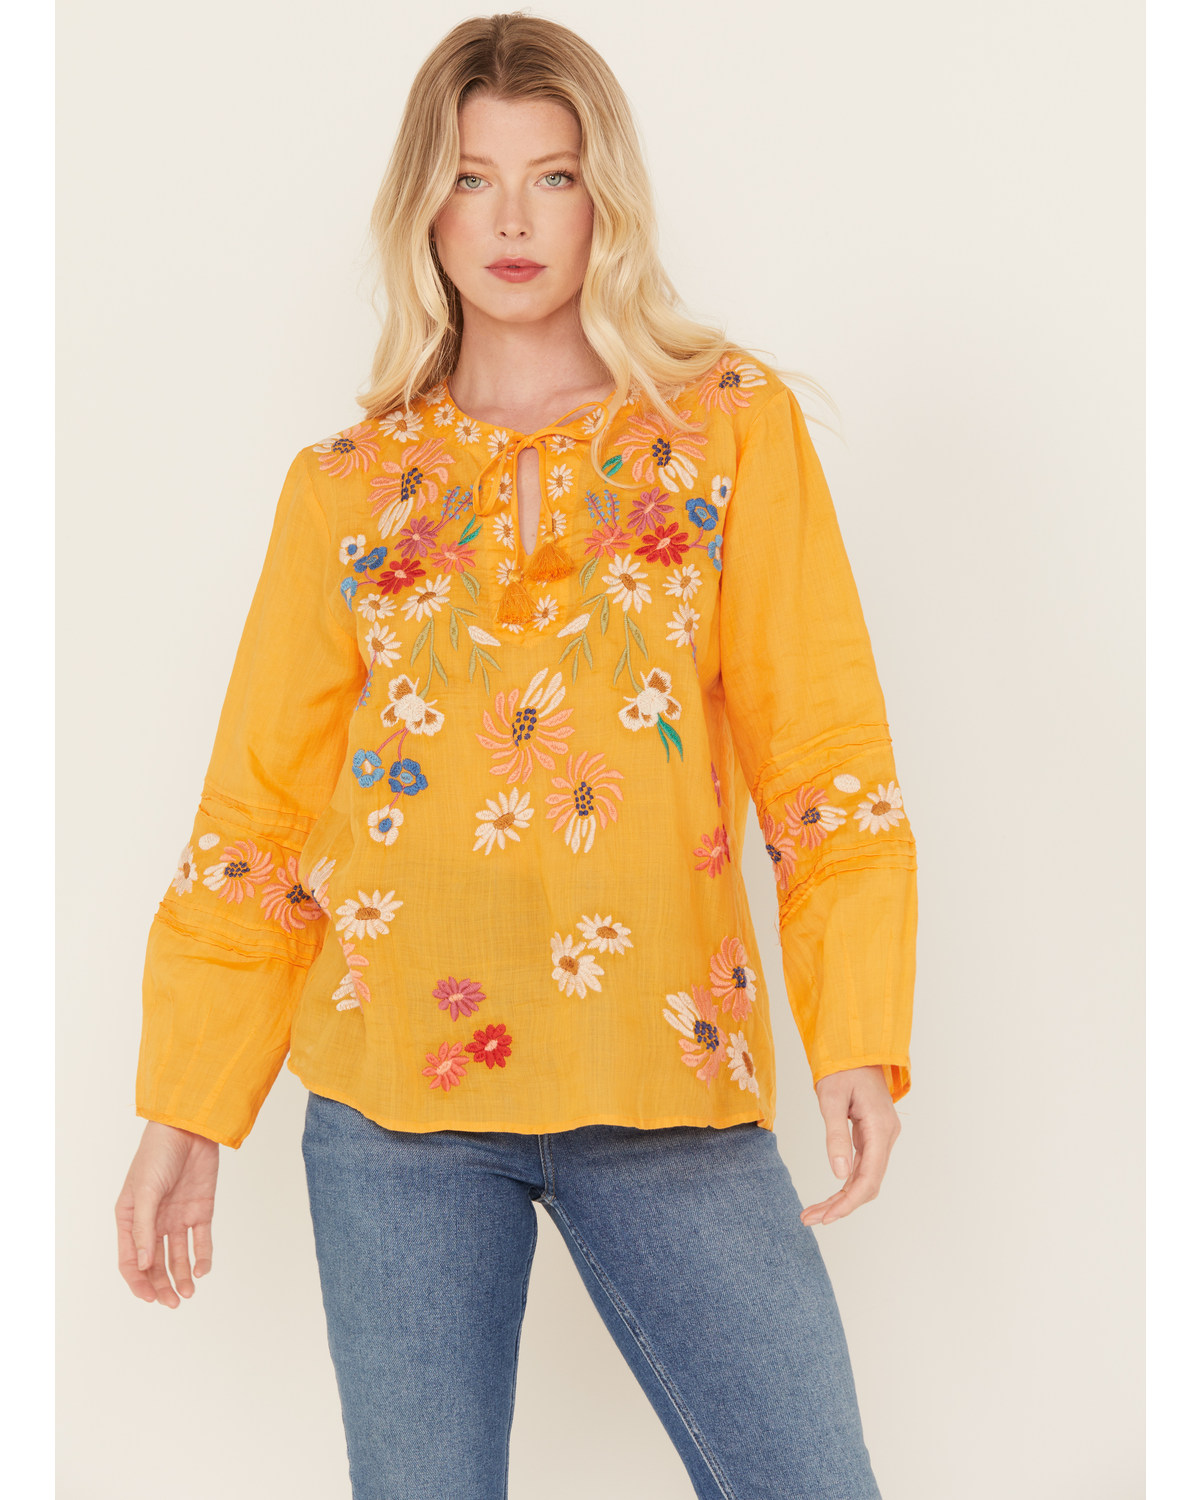 Johnny Was Women's Marissa Floral Embroidered Long Sleeve Pintuck Blouse